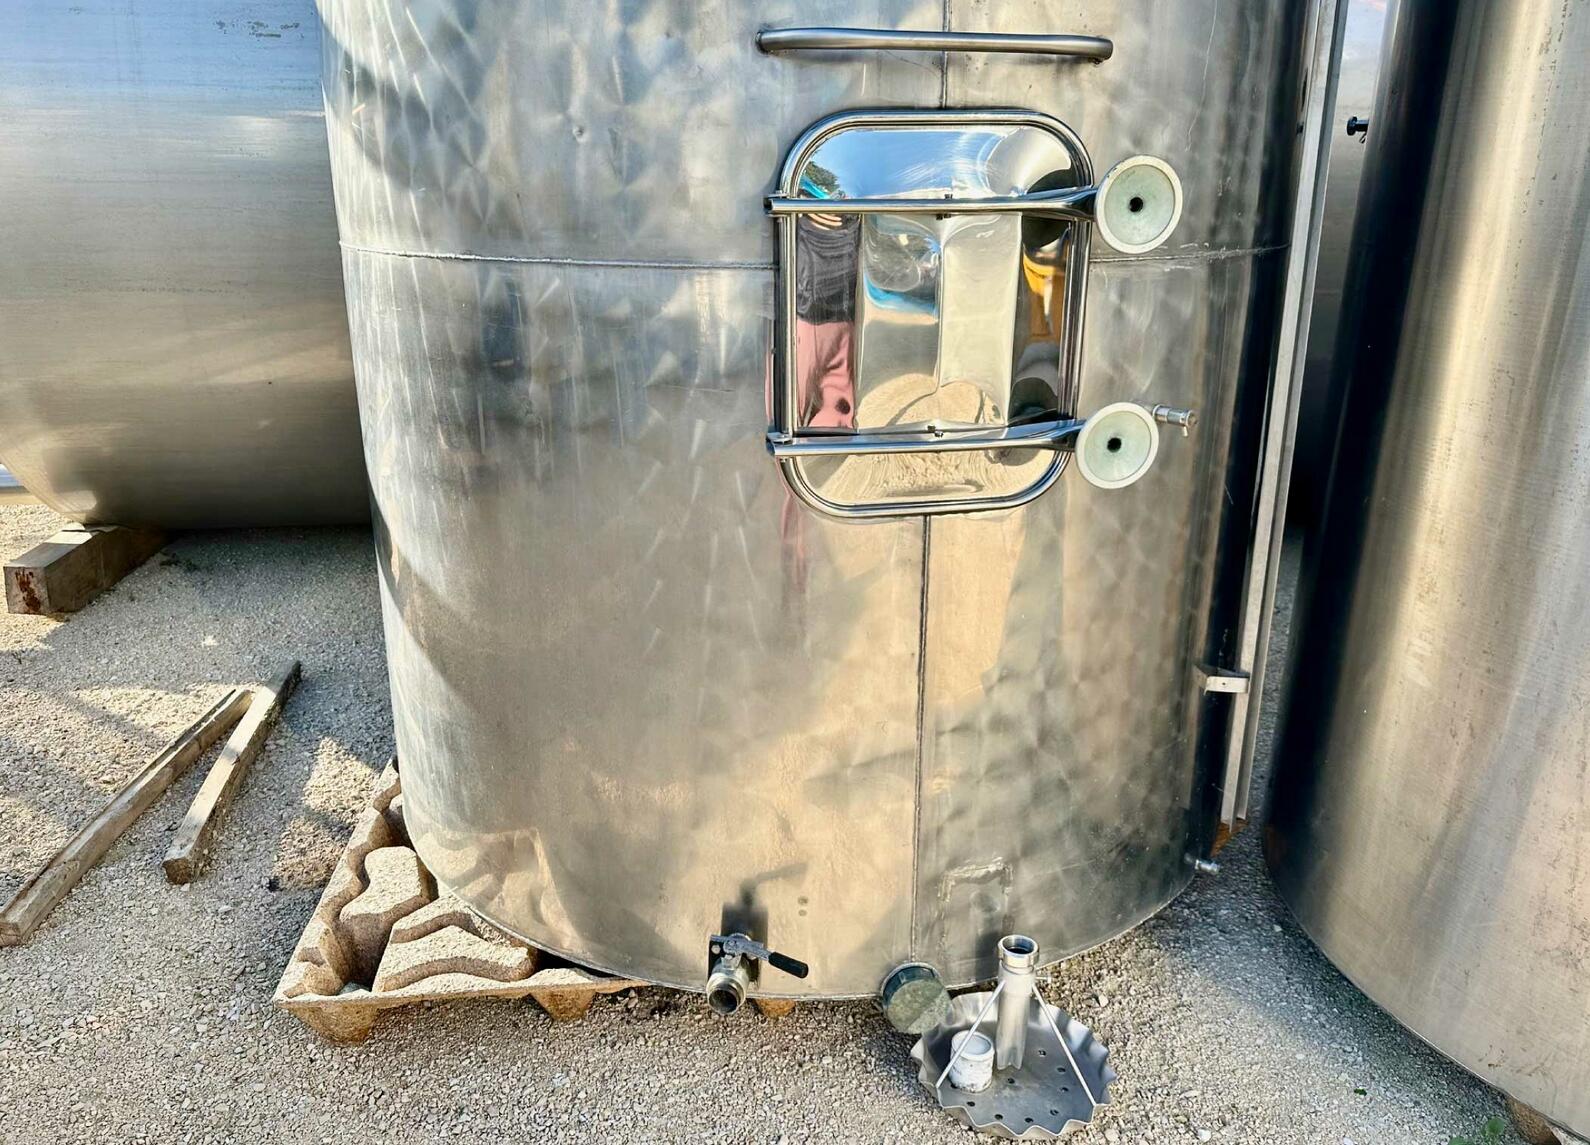 Stainless steel tank - With coil - Storage